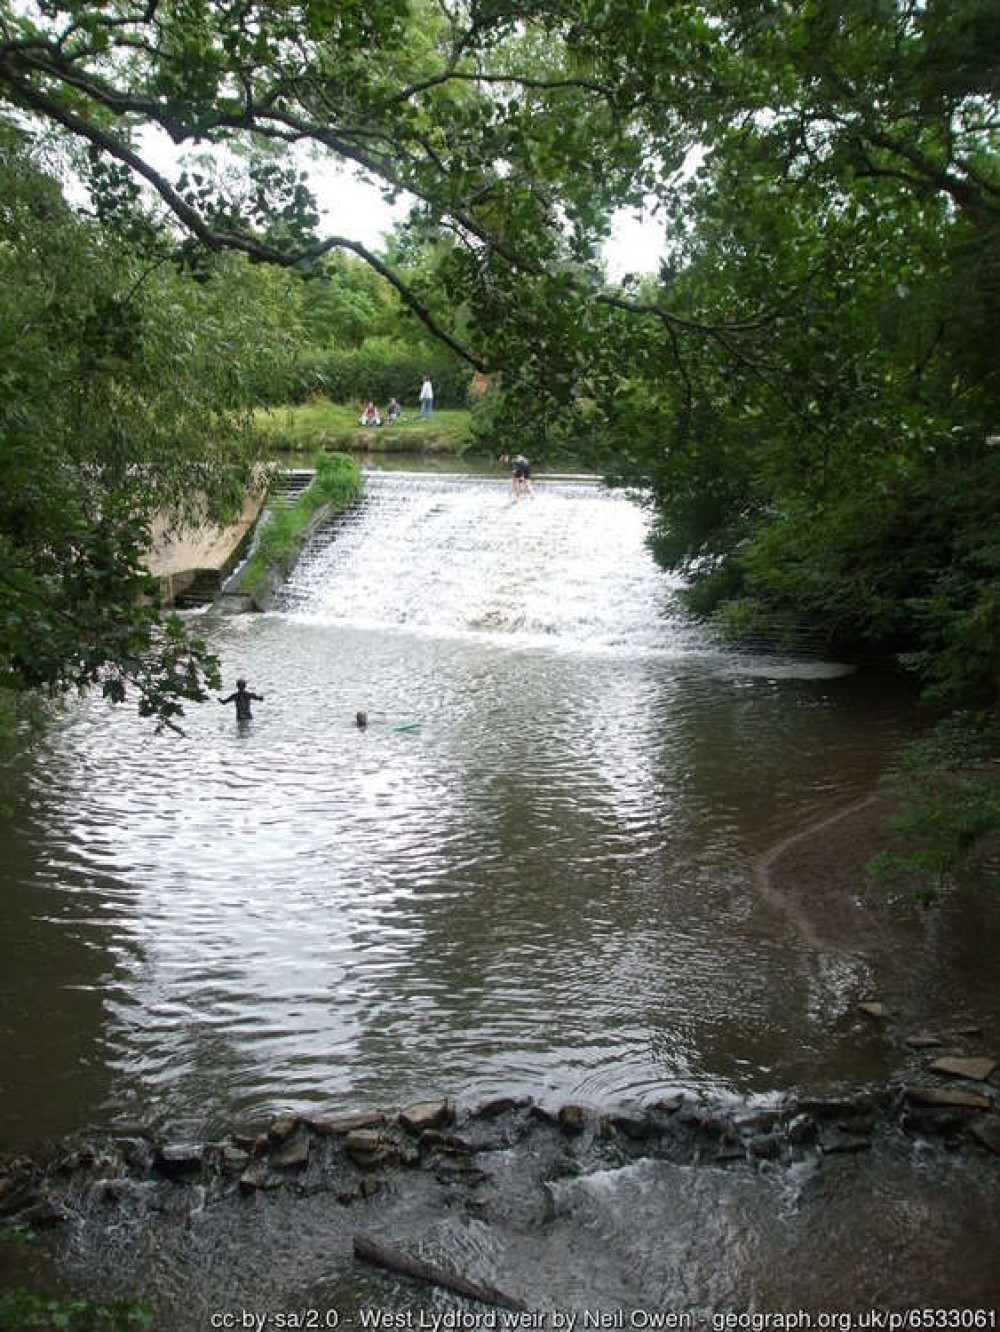 The weir at West Lydford